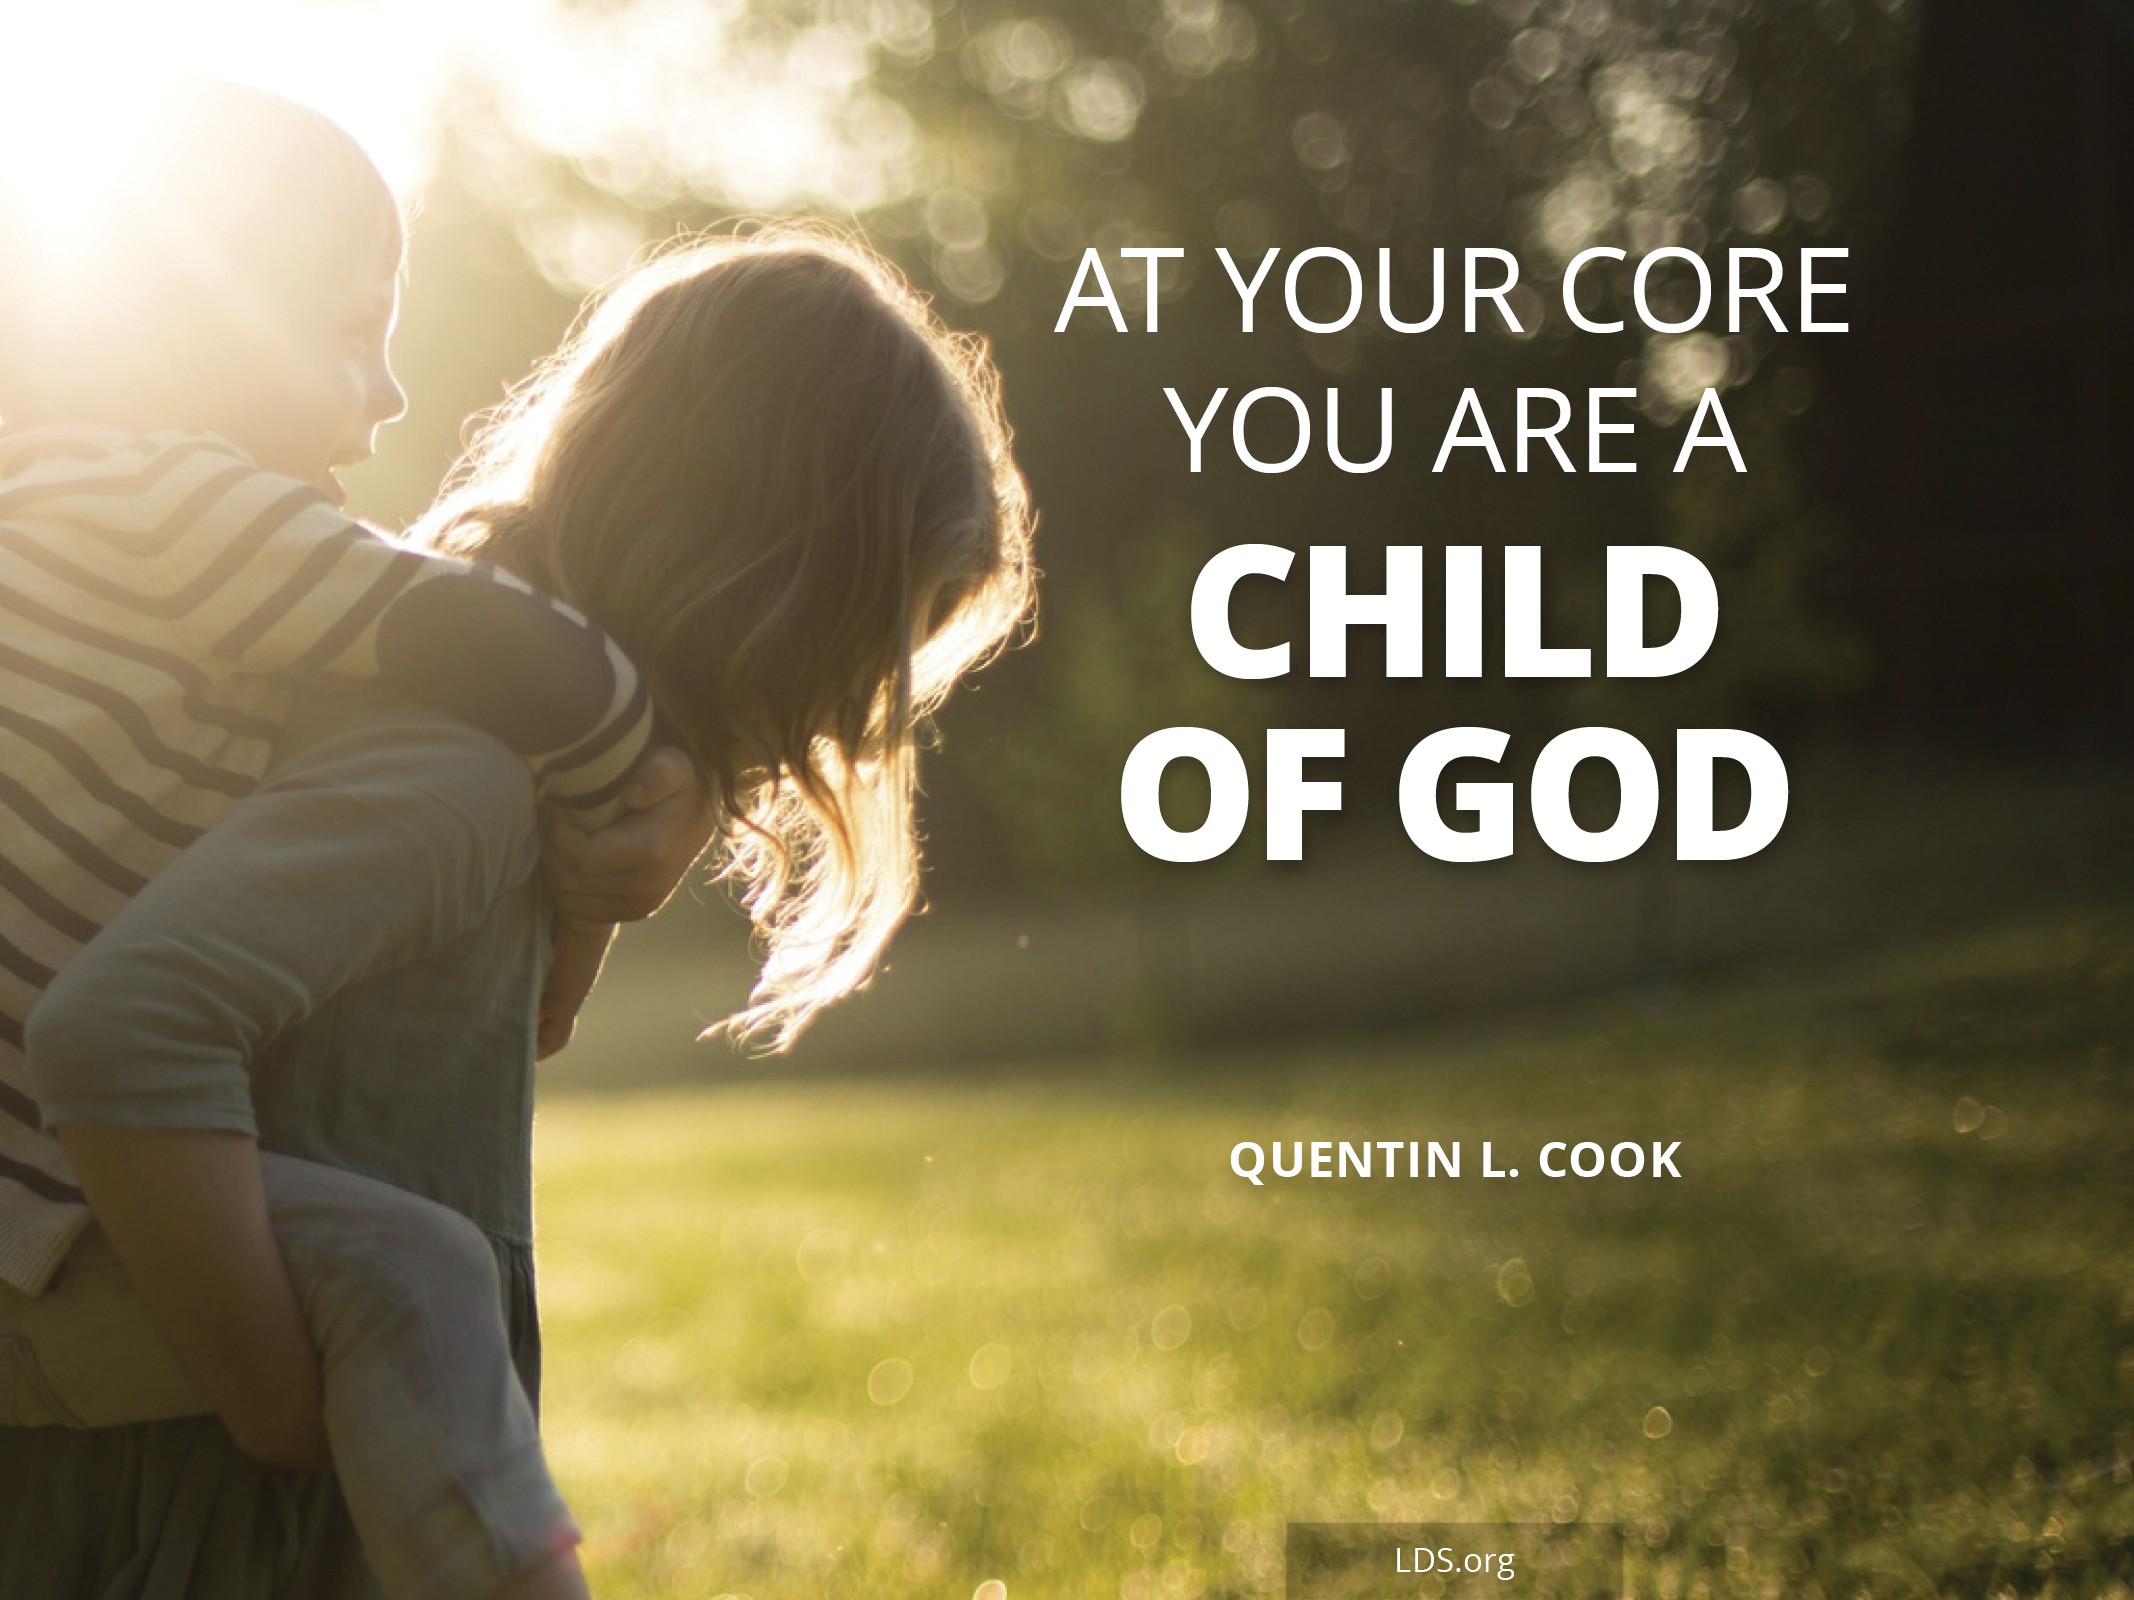 An image of a young child giving a toddler a piggyback ride with the words “At your core you are a child of God.”